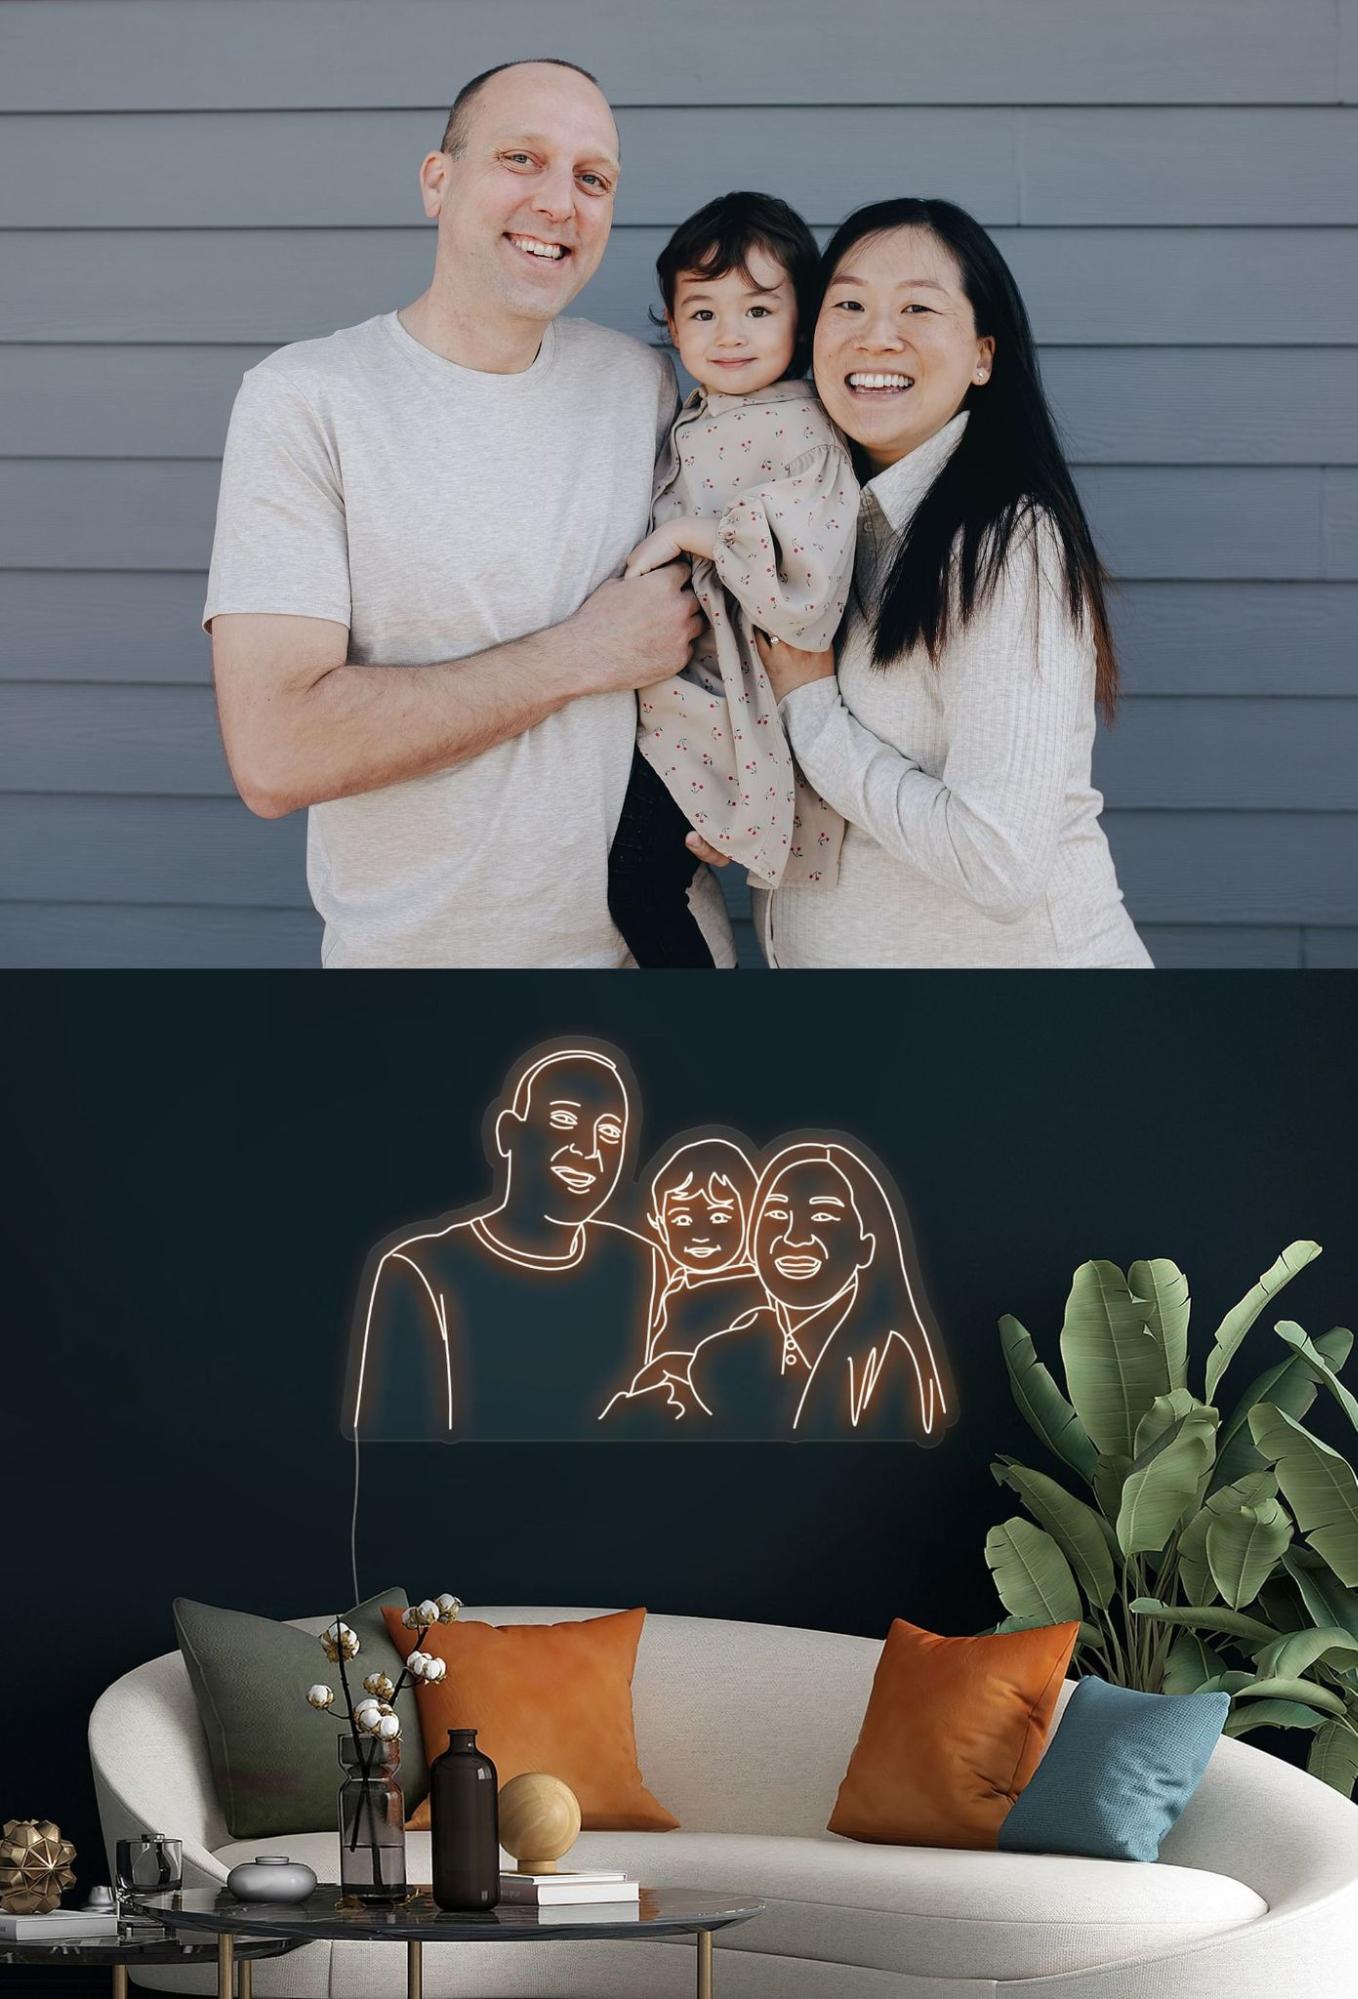 A customized family photo neon sign